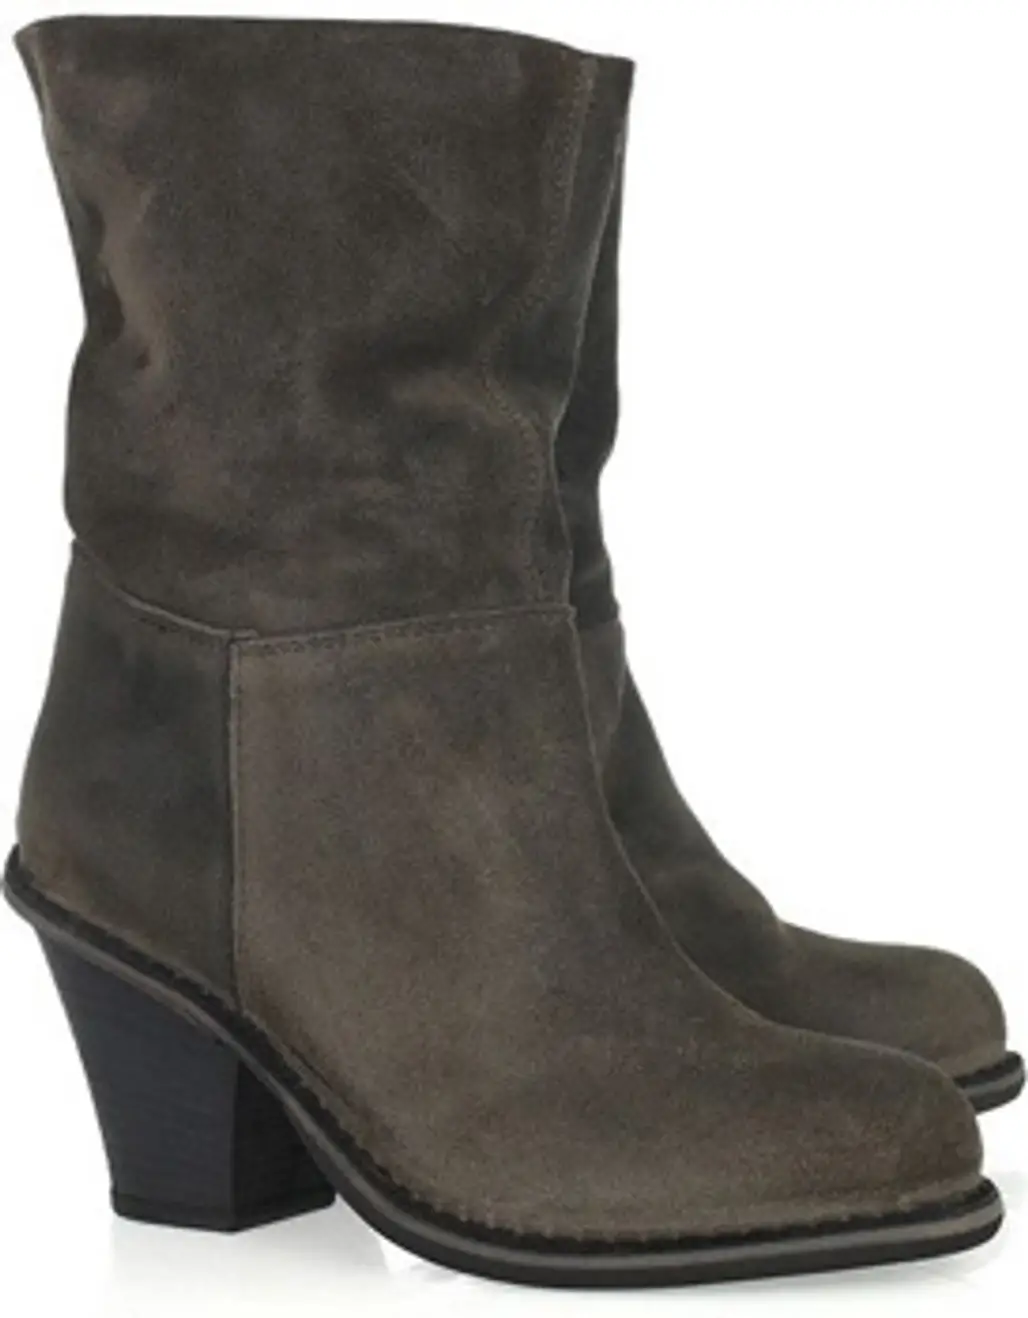 Fiorentini & Baker Pia Slouchy Suede Boots